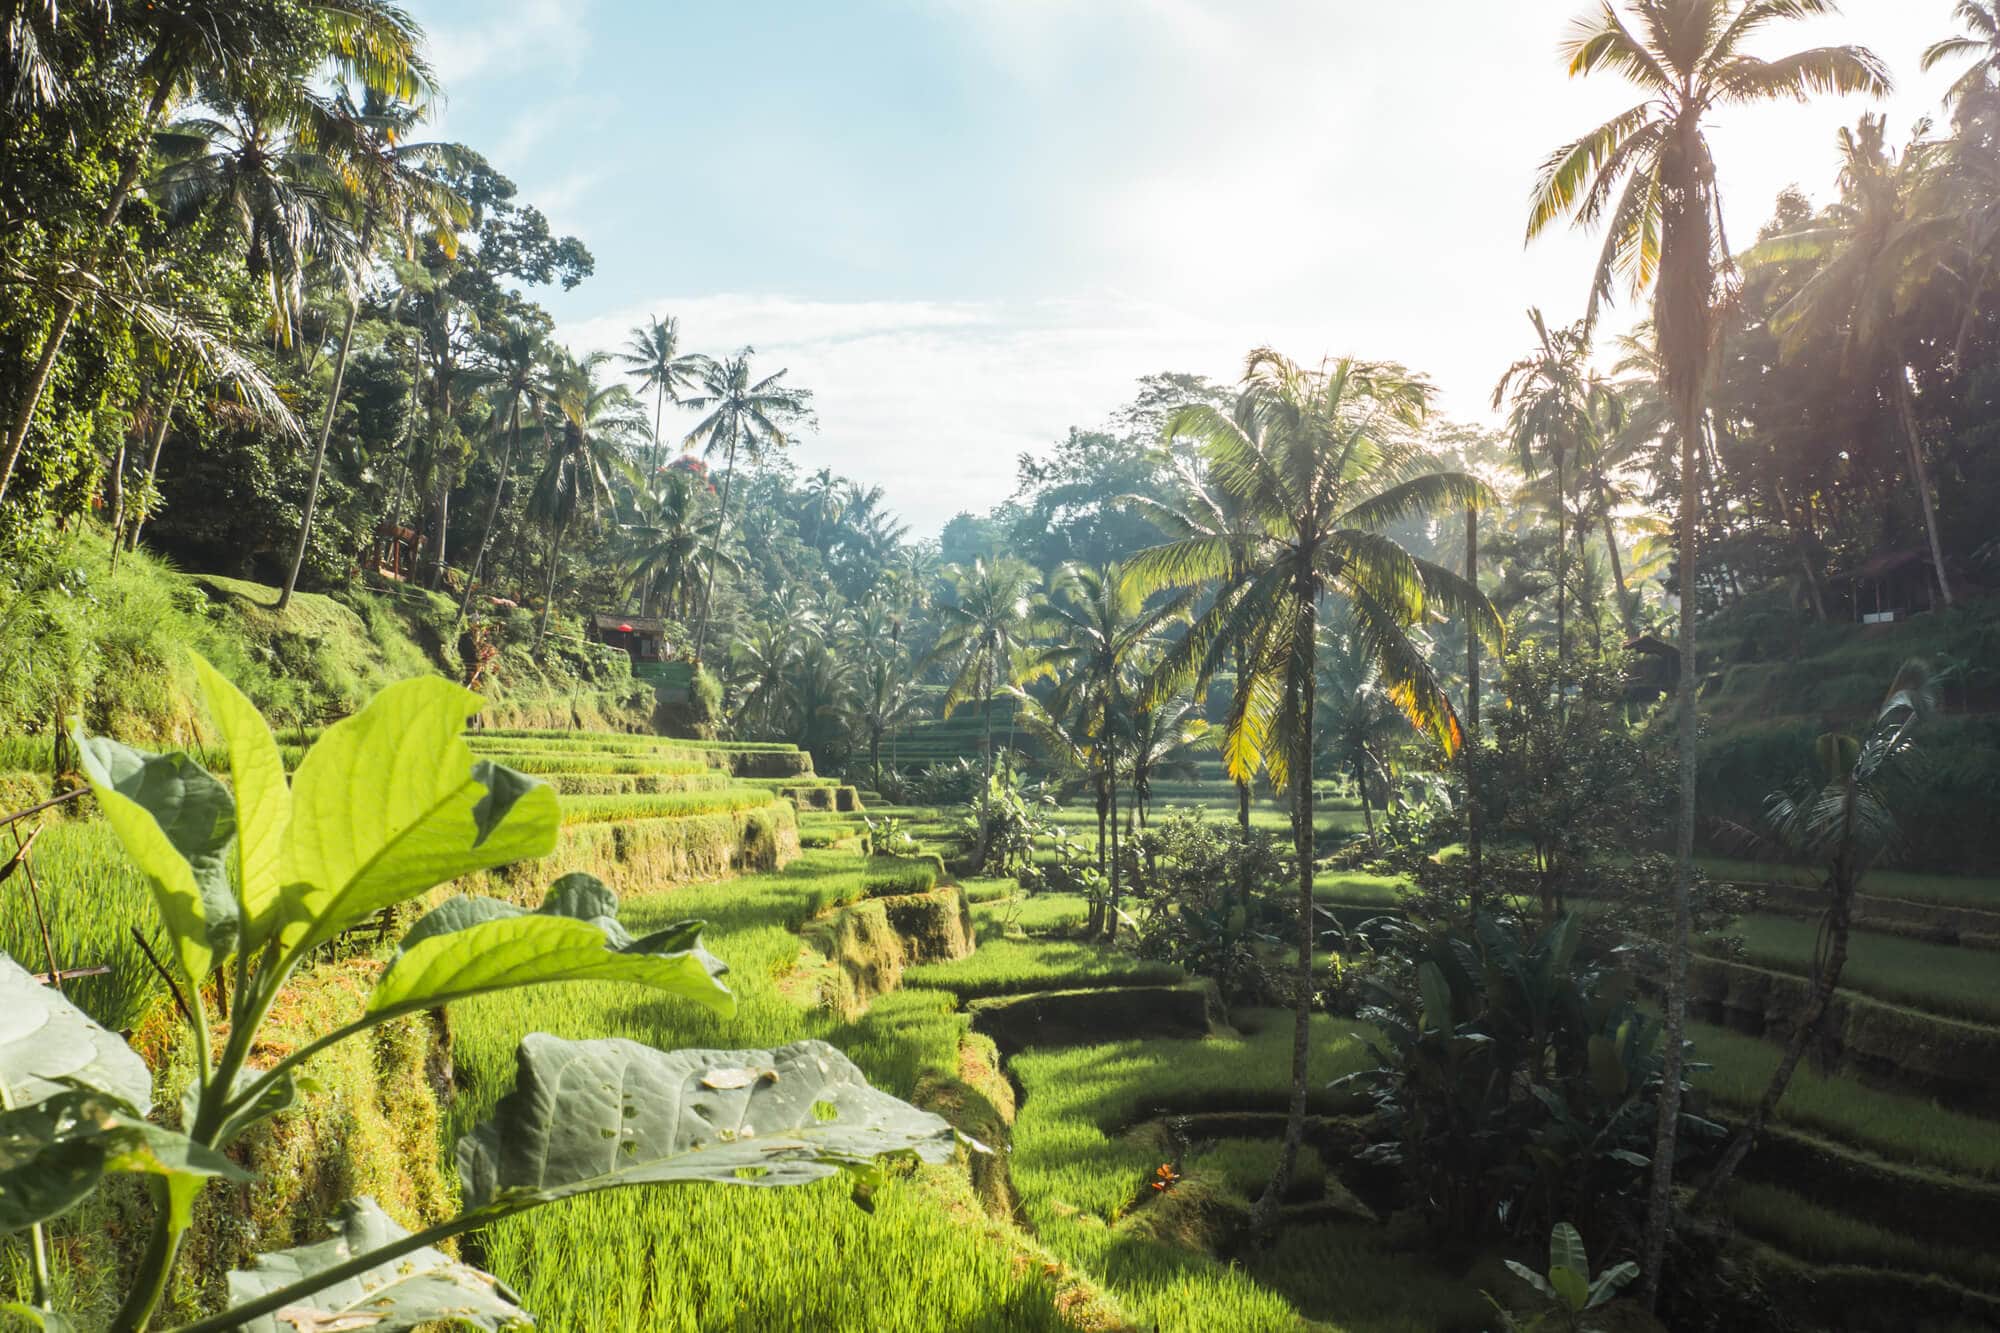 Where to stay in Bali: A complete guide to the different areas on the island - Sunrise at Tegalalang Rice Terrace in Ubud